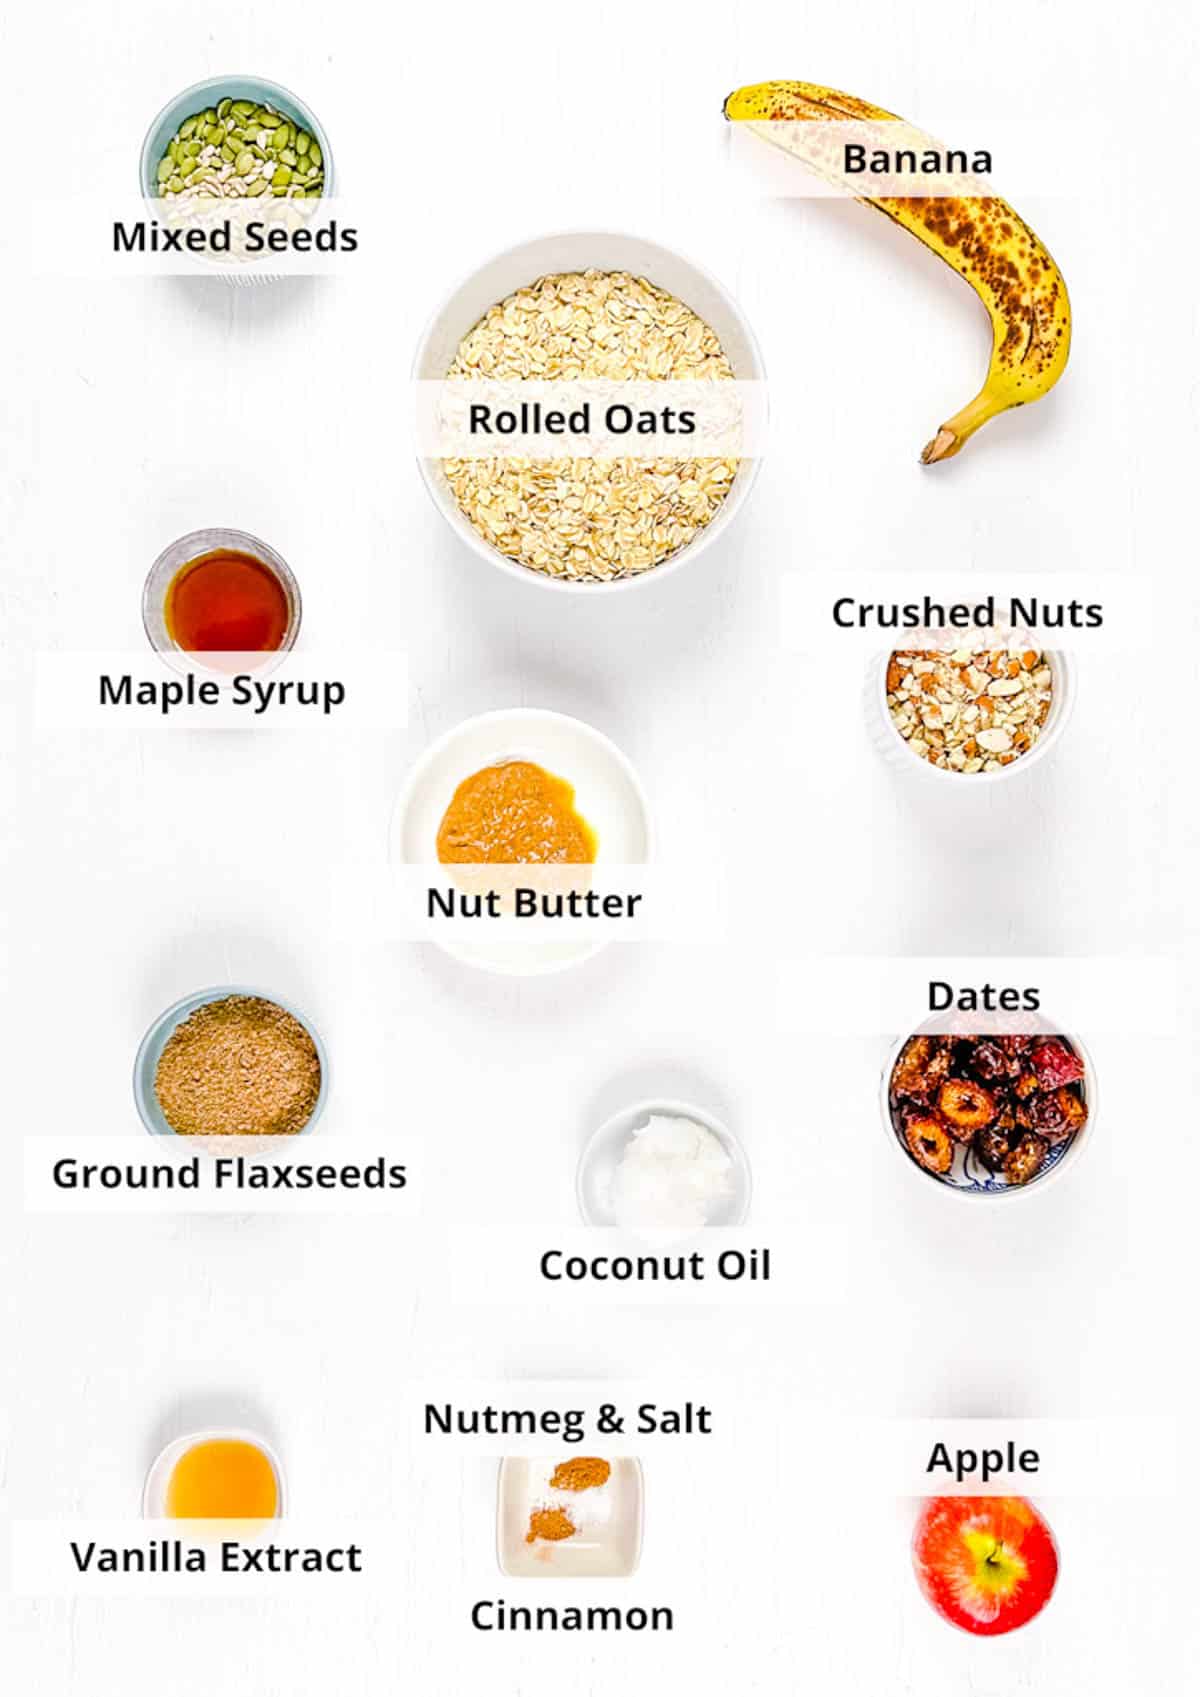 Ingredients for healthy flapjacks recipe on a white background.